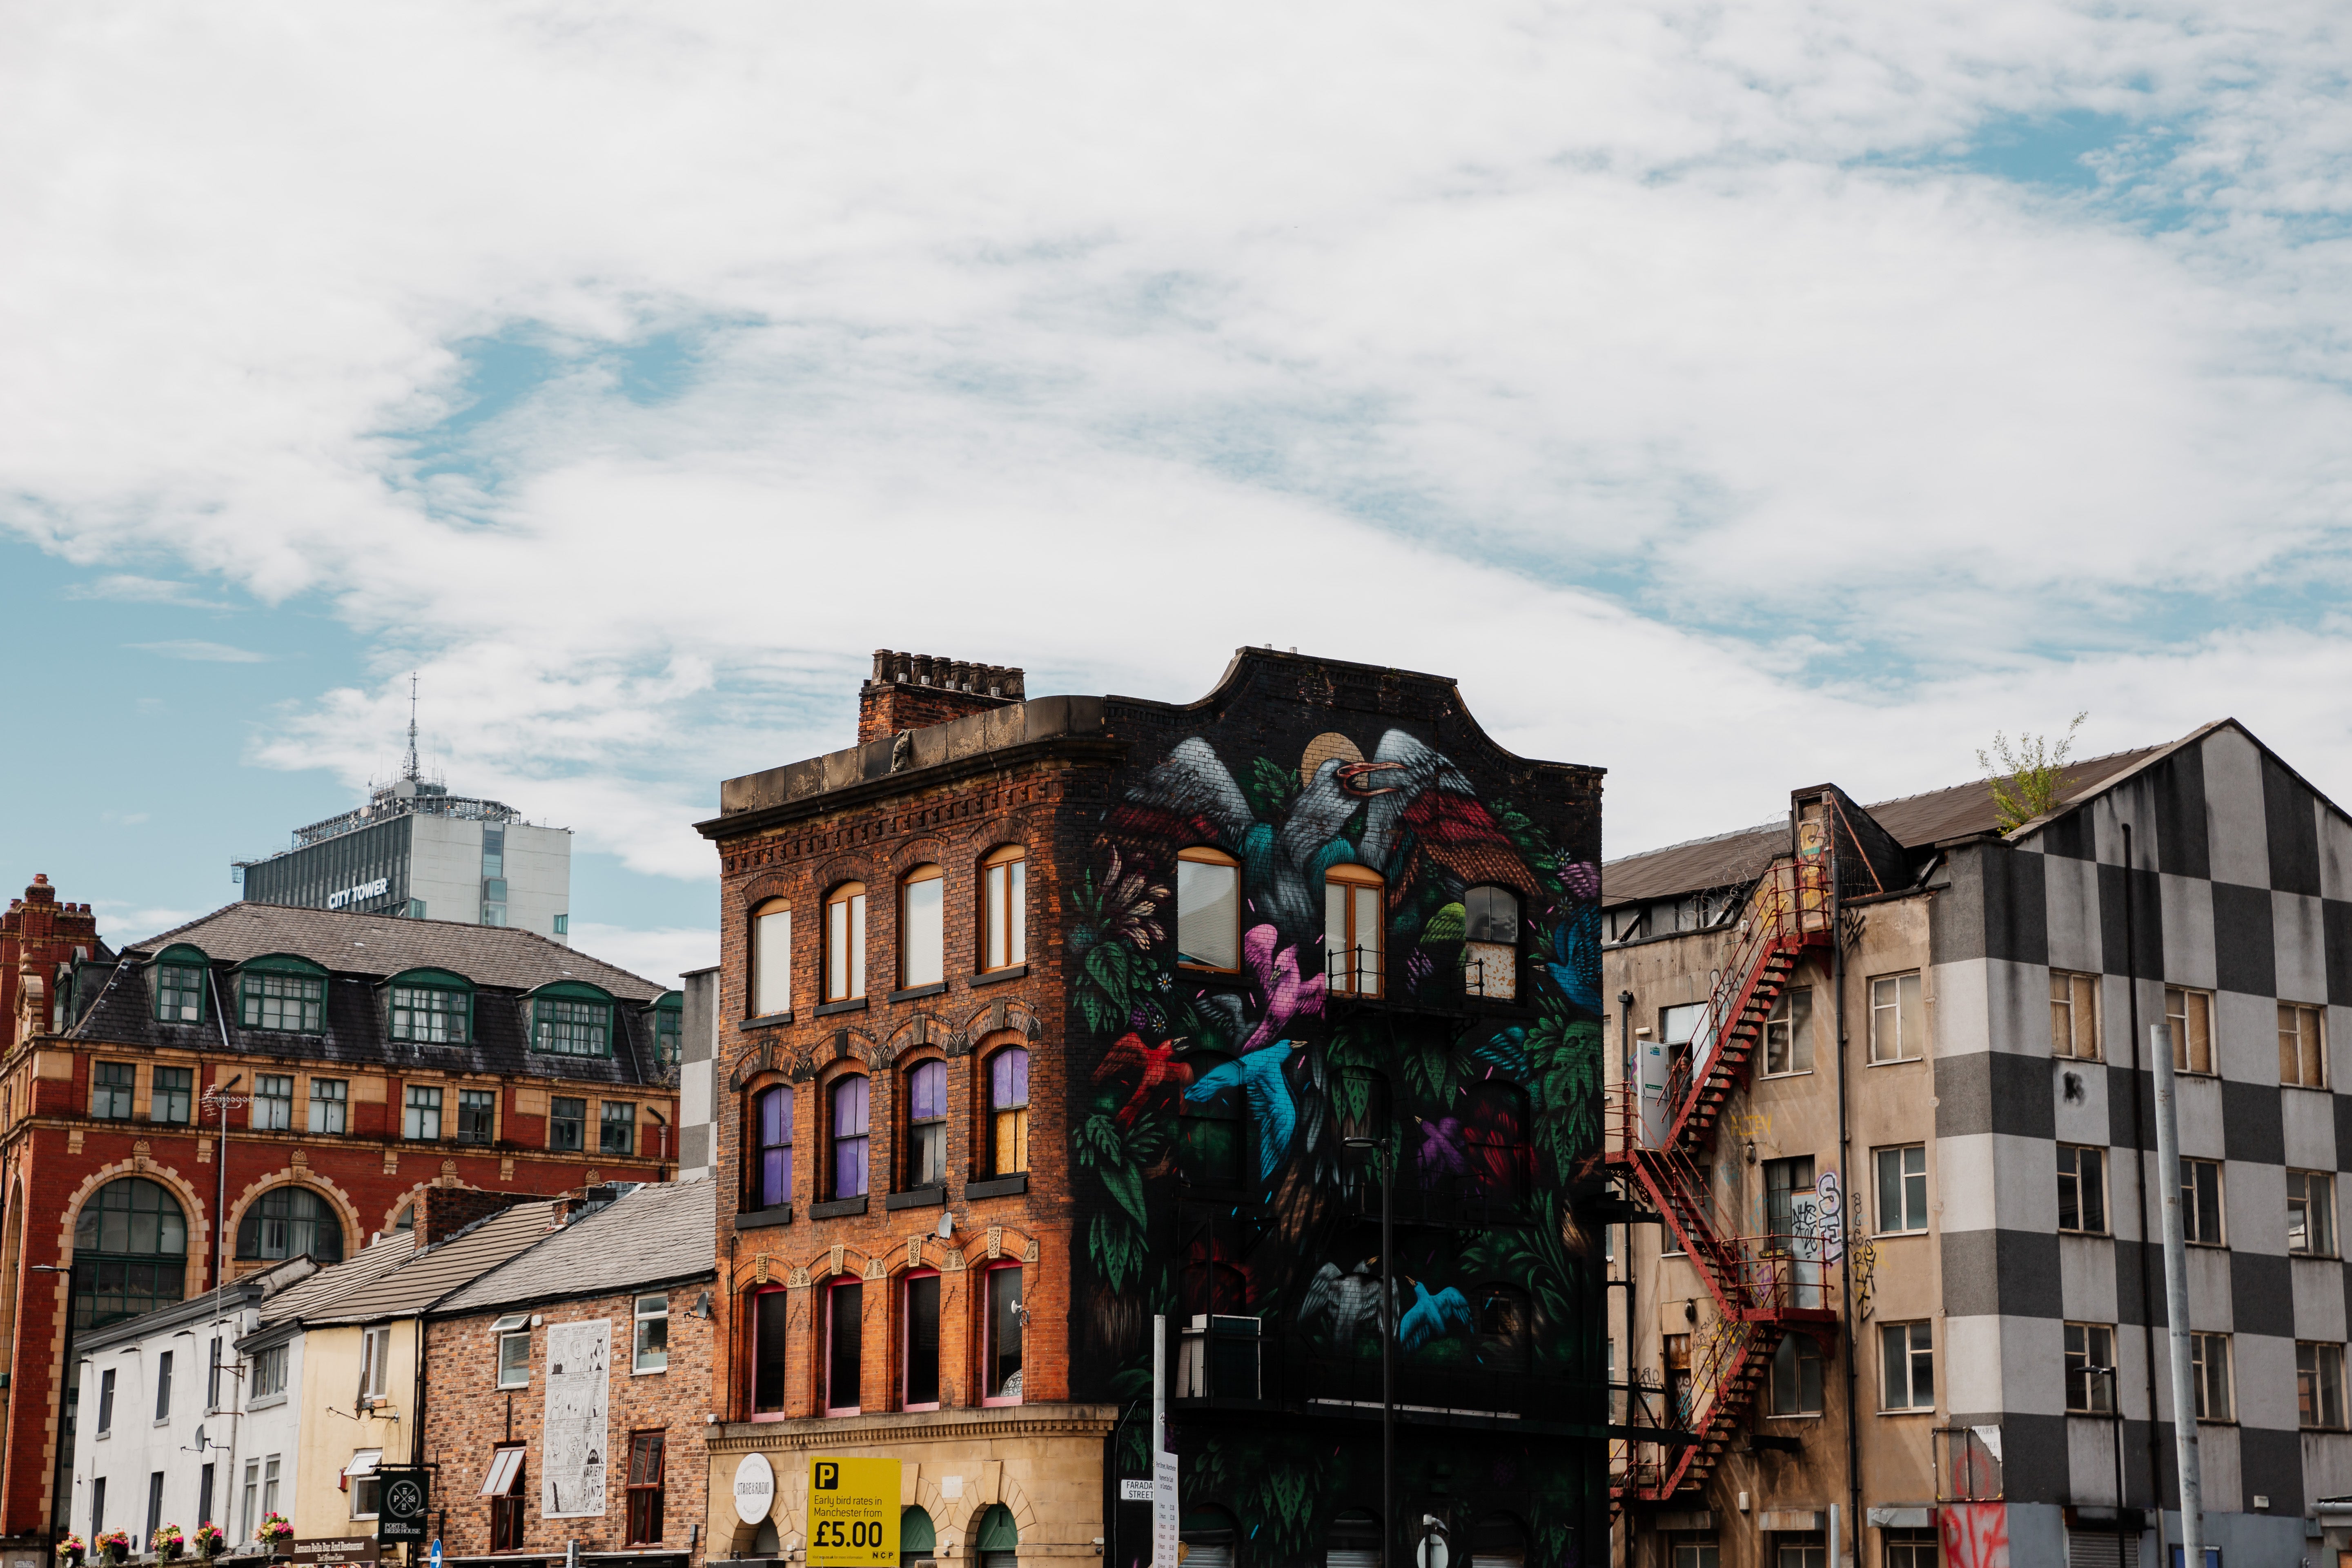 Quirky architecture and street art makes Manchester a delight to wander